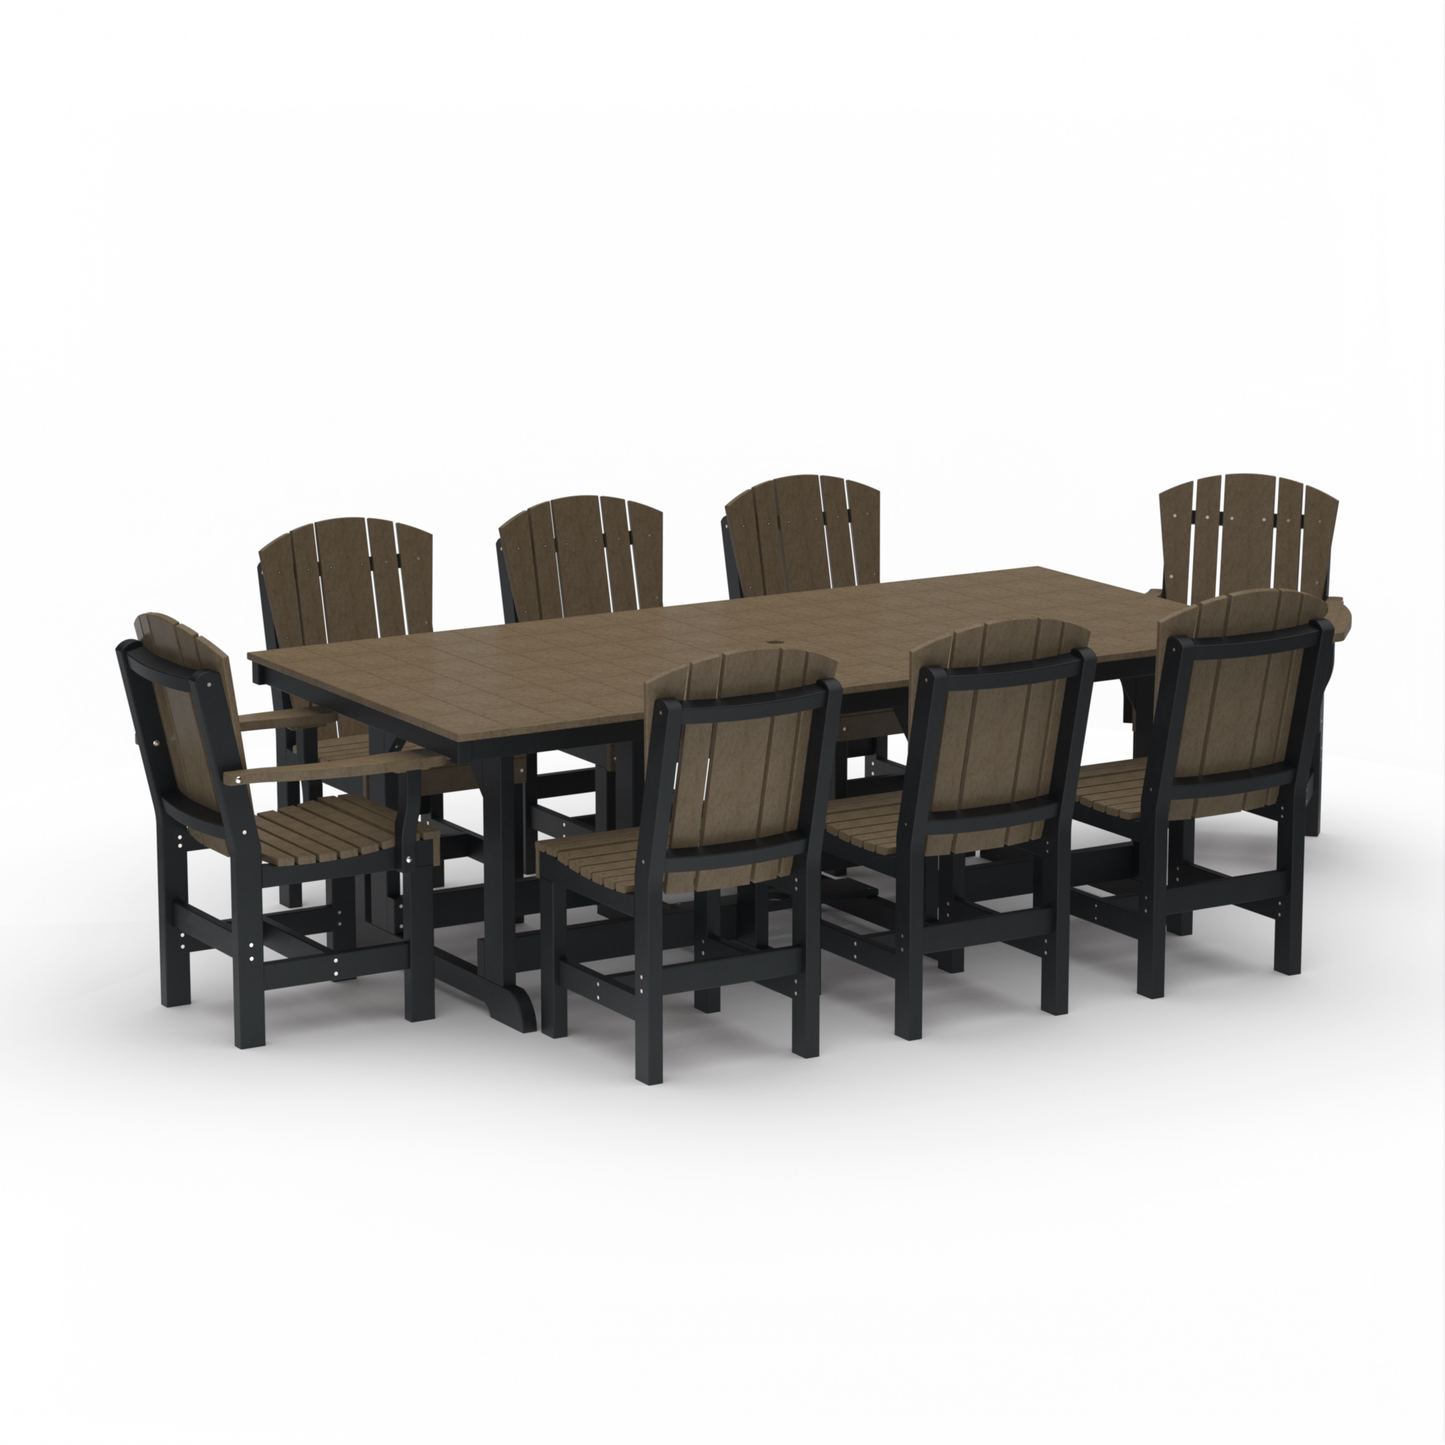 Wildridge Recycled Plastic Heritage 44"x94" Table Set with 8 Dining Chairs - LEAD TIME TO SHIP 6 WEEKS OR LESS